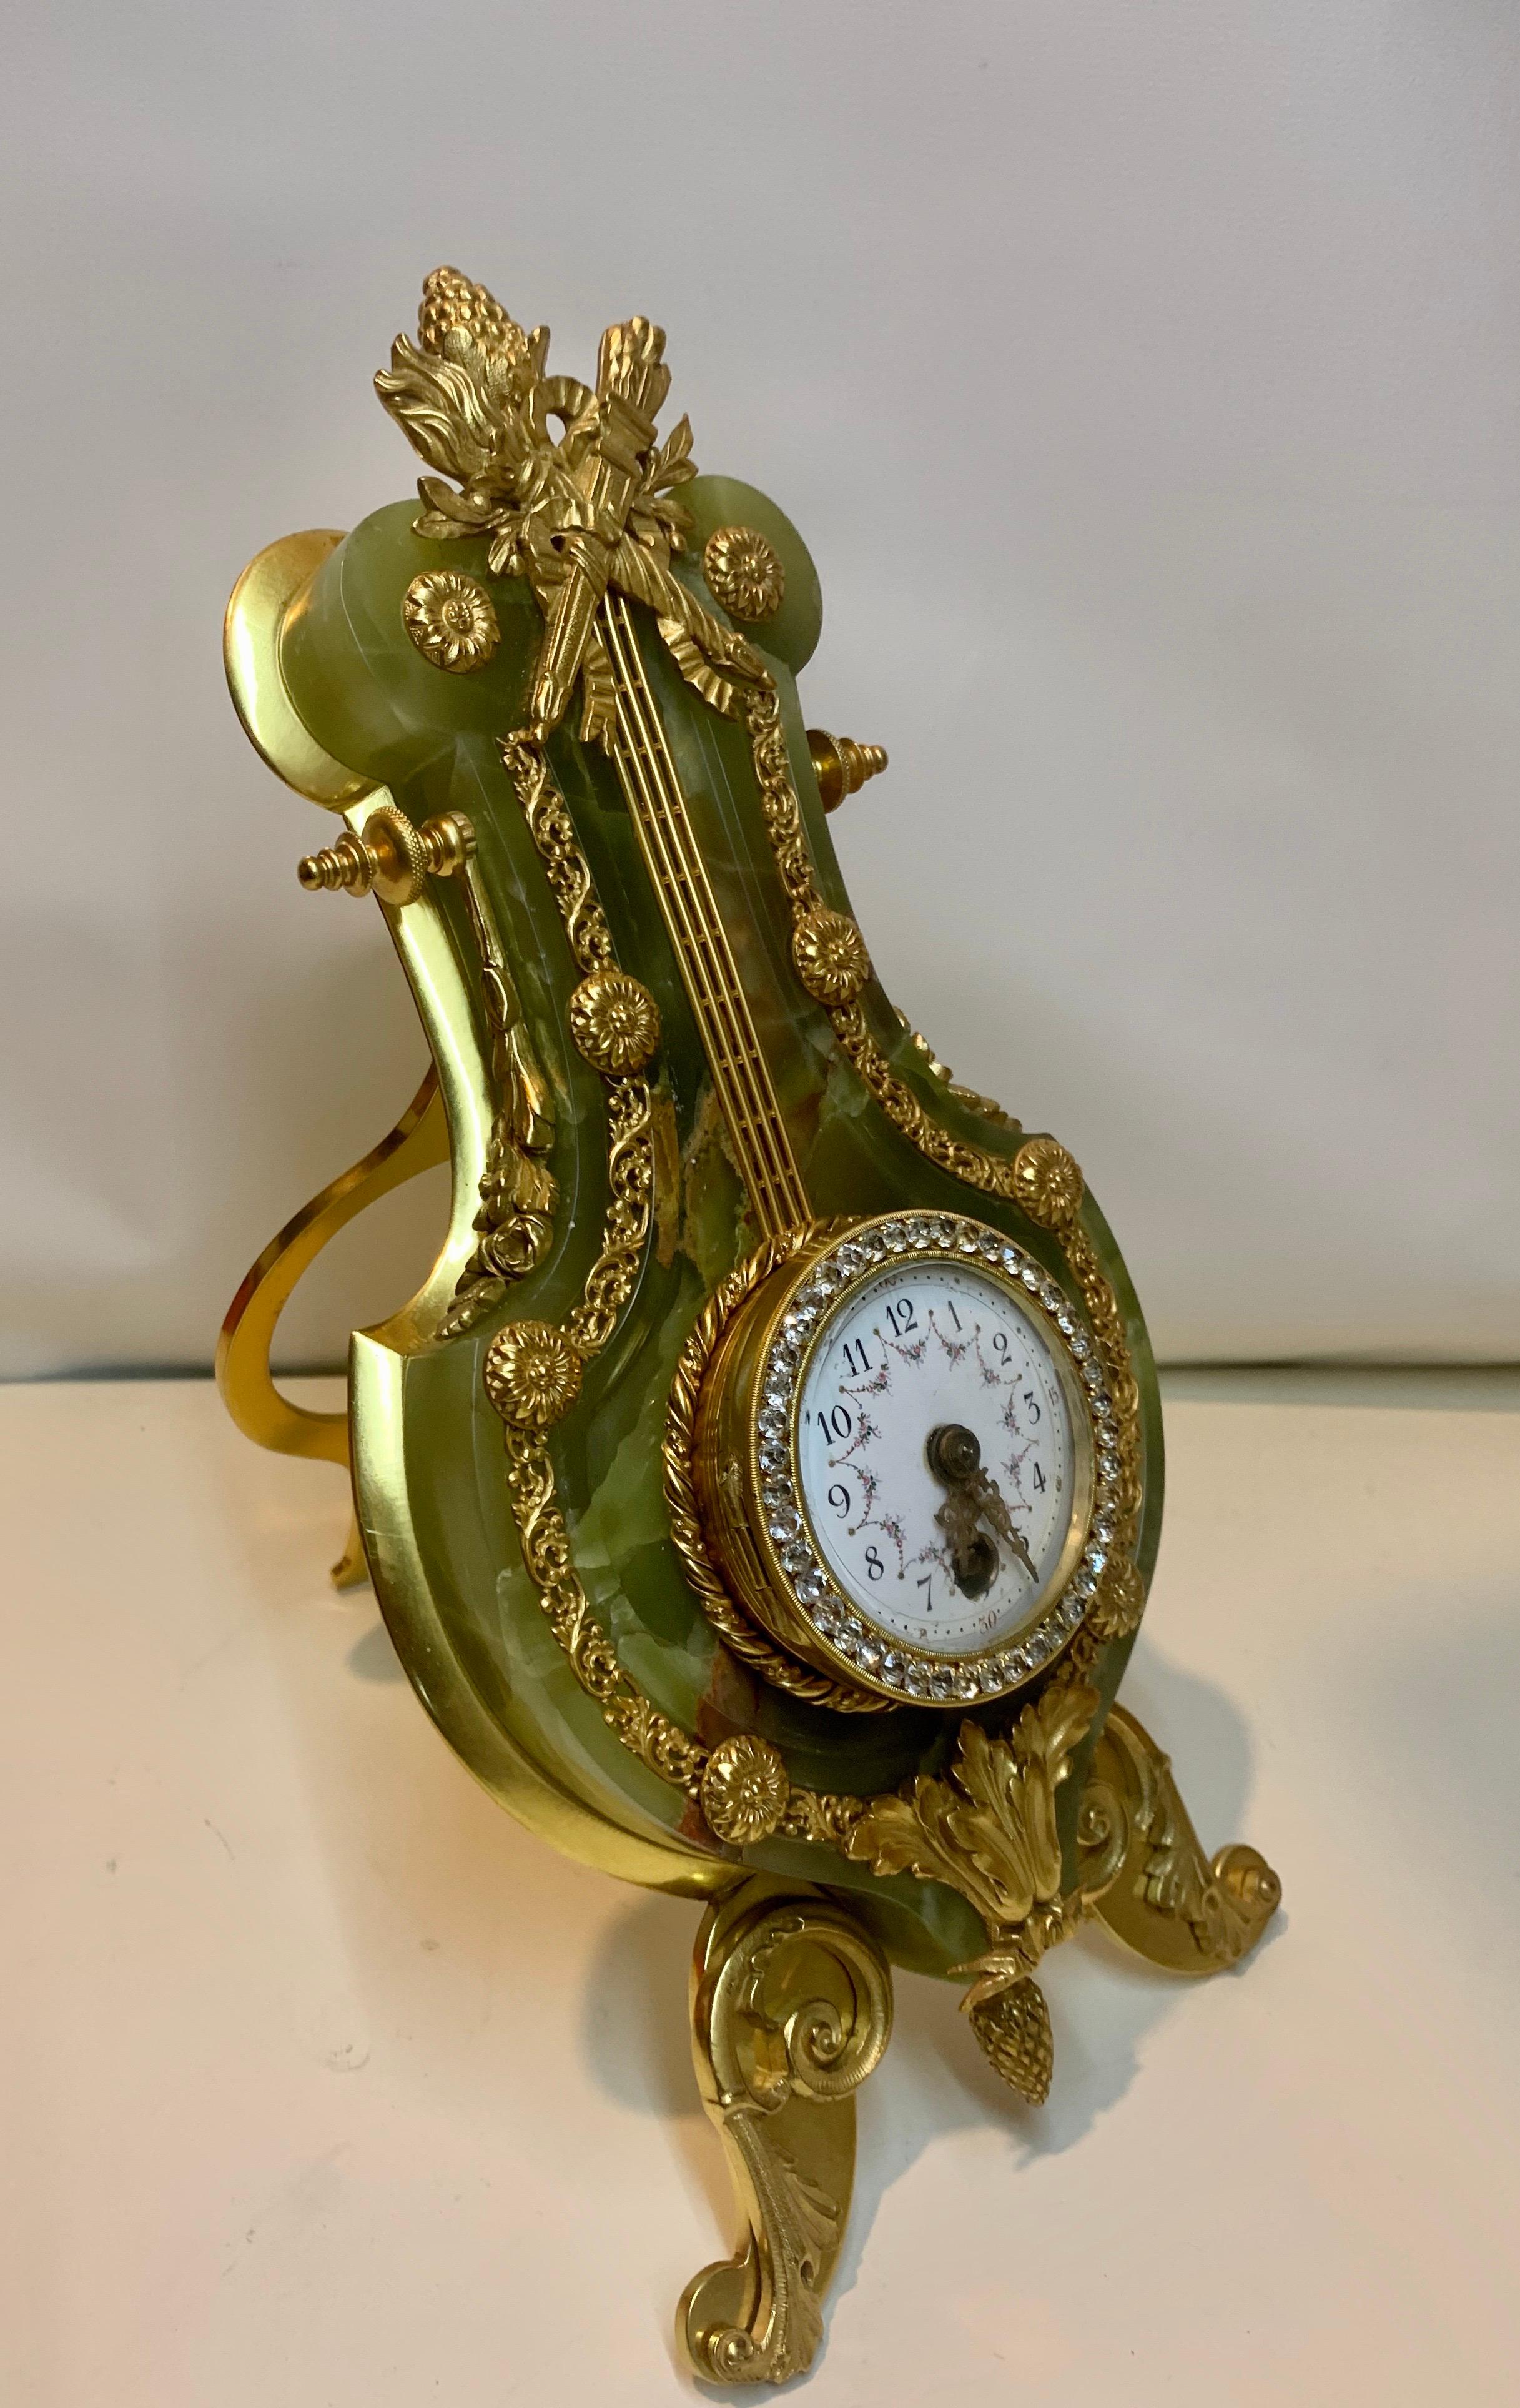 A very impressive French Louis XVI green onyx and gilt bronze ormolu Strut clock in the Louis XVI style. This superb clock has scrolling leaf and floral branch designs and it has a decorative Acorns to the top and bottom with swags and intricate